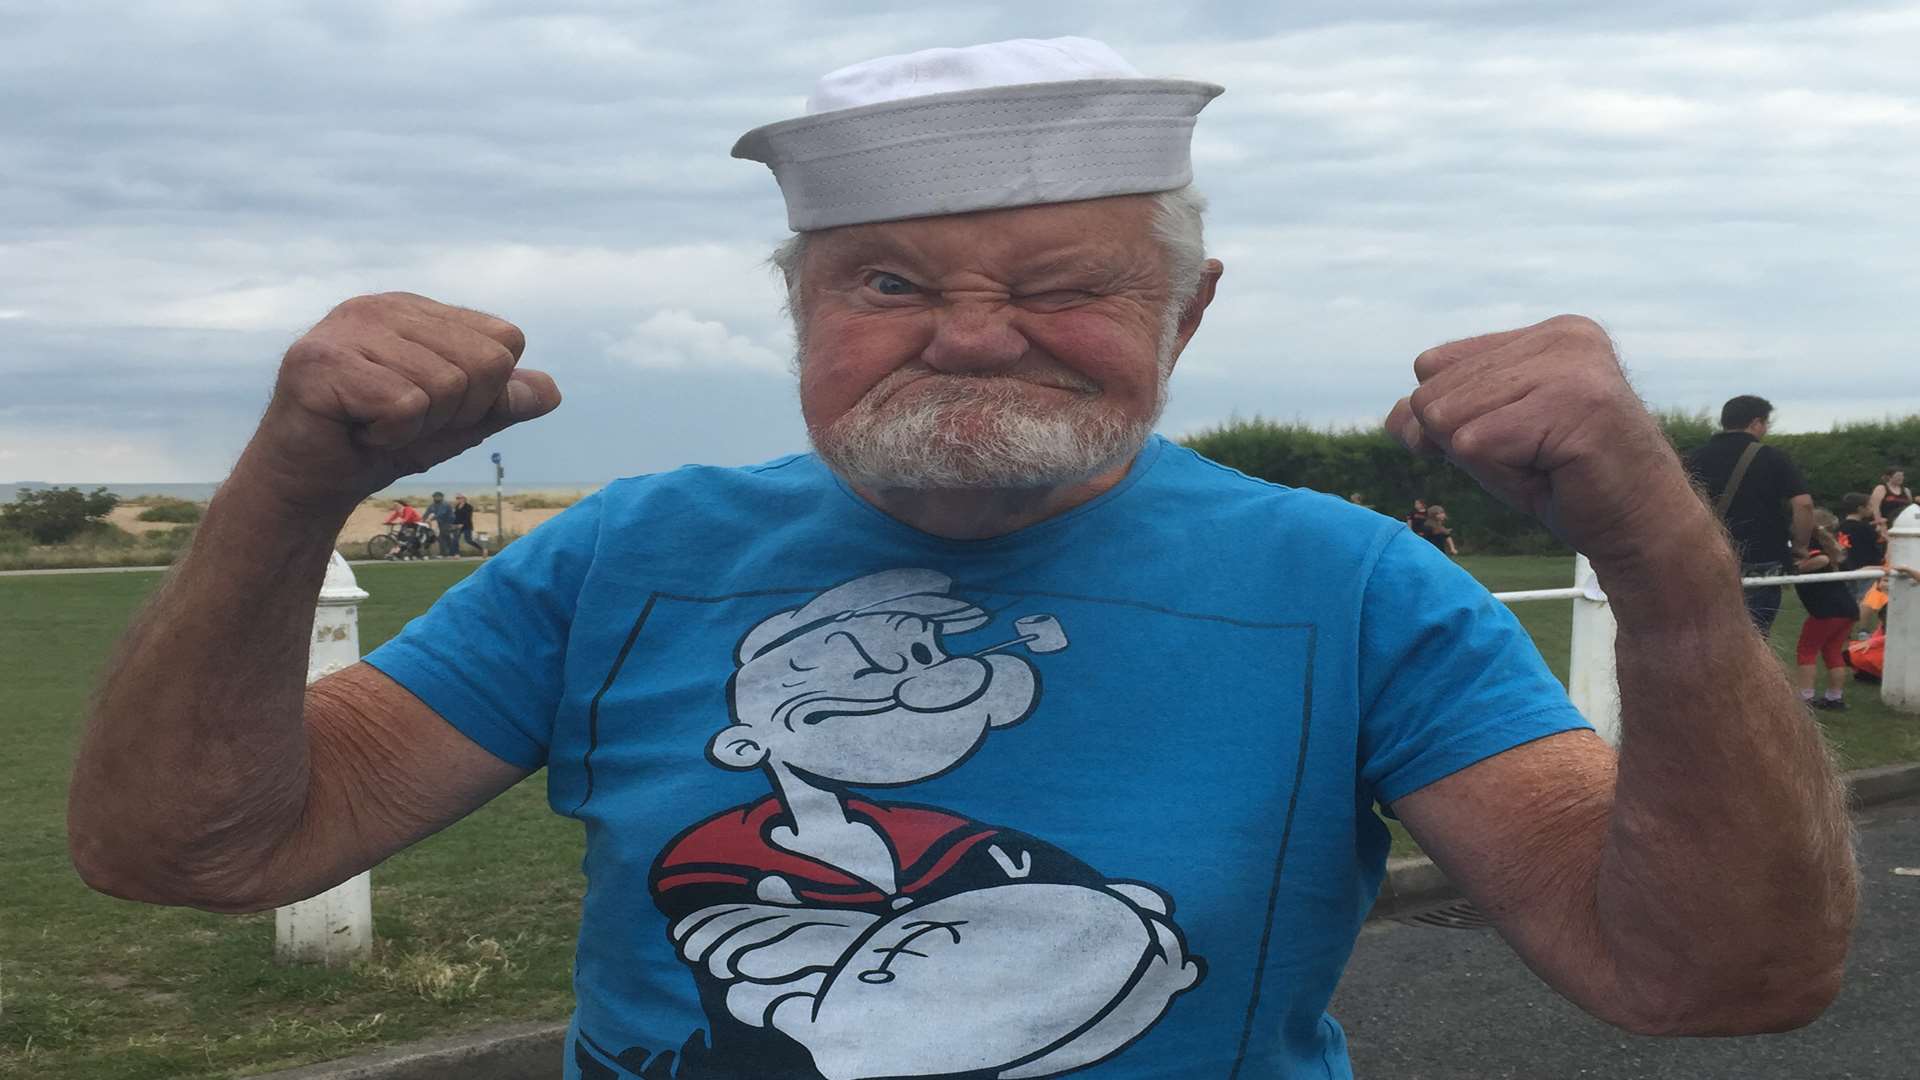 Deal's carnival wouldn't be complete without Popeye aka 84-year-old Ron Everett from Hastings